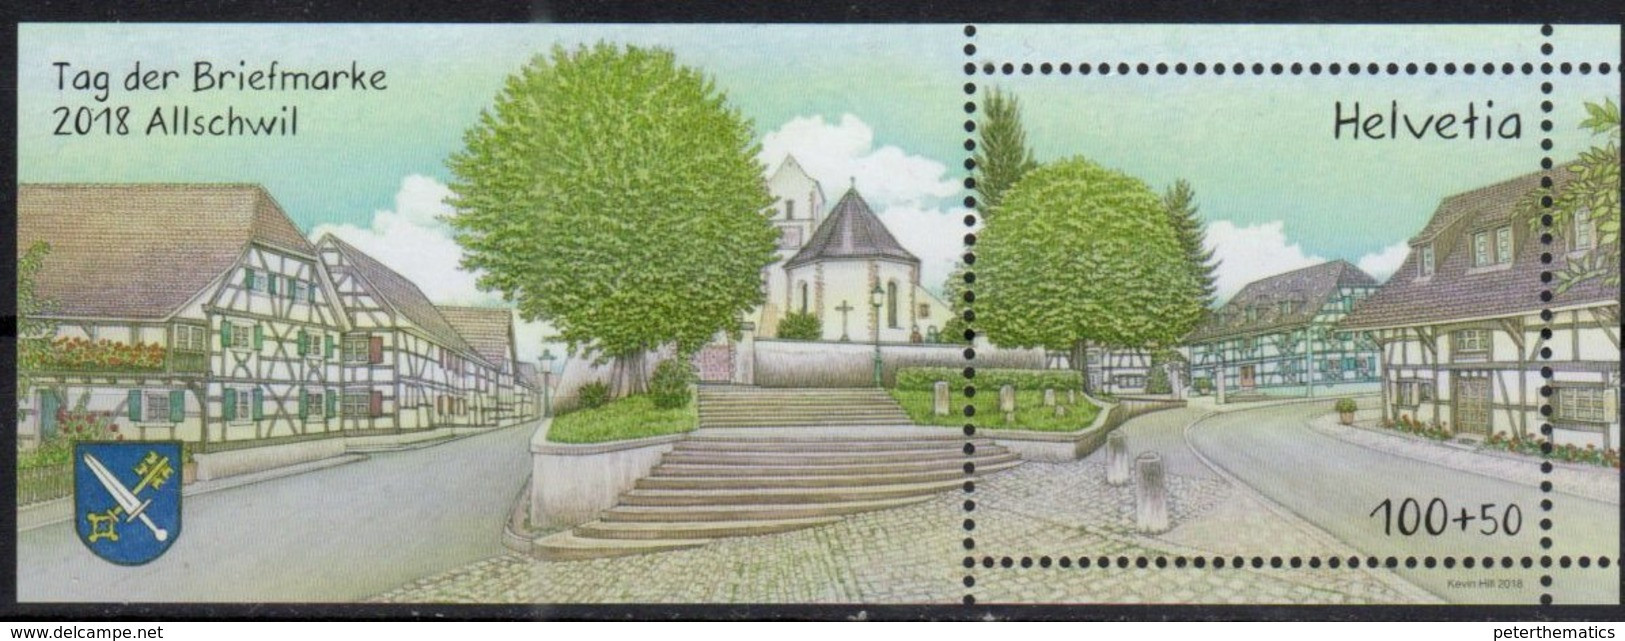 SWITZERLAND, 2018, MNH,STAMP DAY, CHURCHES, ALLSCHWIL, HALF-TIMBER HOUSES, ARCHITECTURE, S/SHEET - Stamp's Day